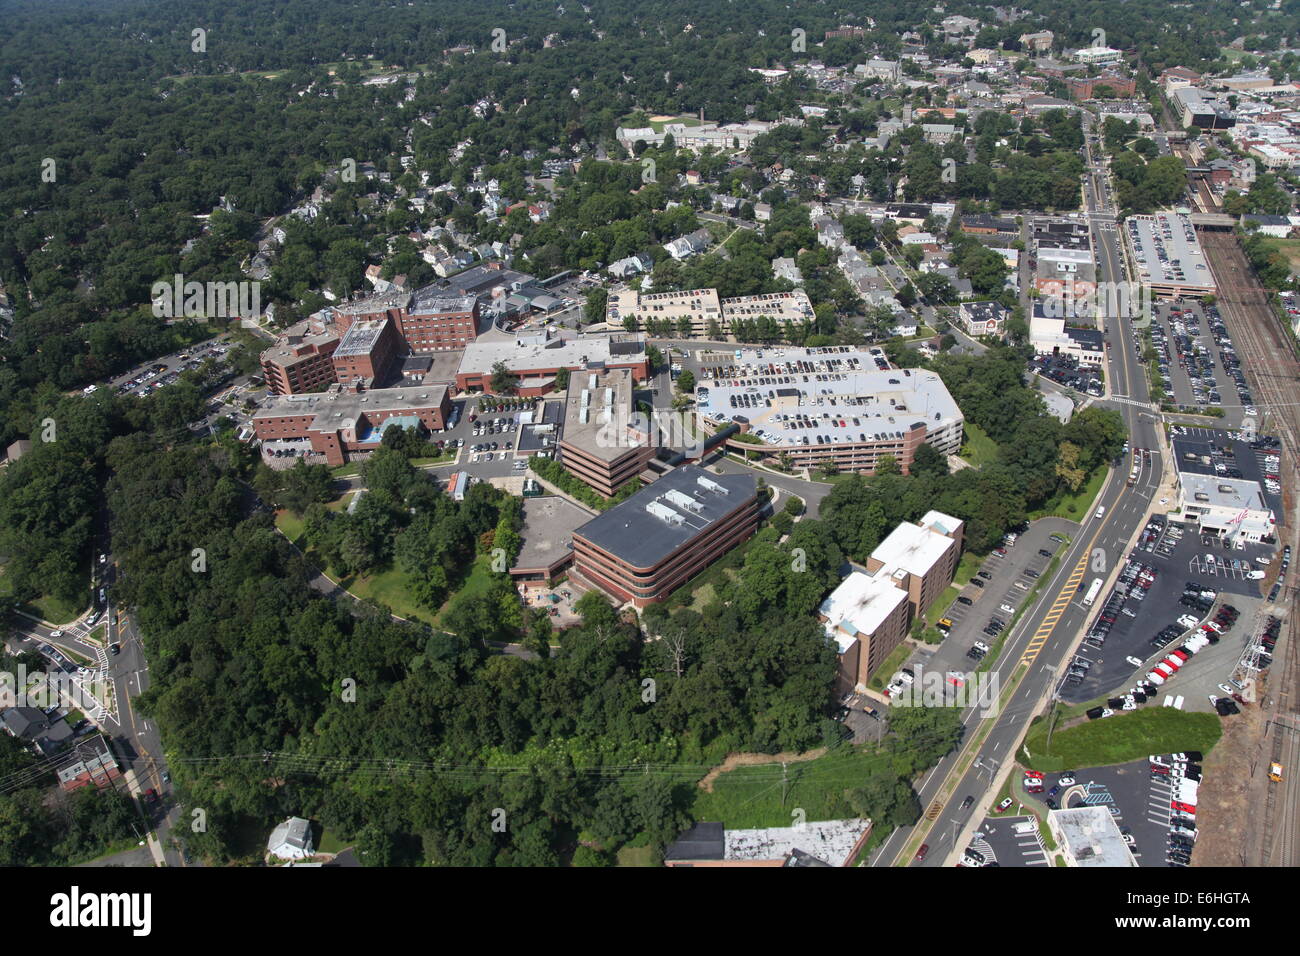 Aerial view of Overlook Hospital in Summit, New Jersey Stock Photo